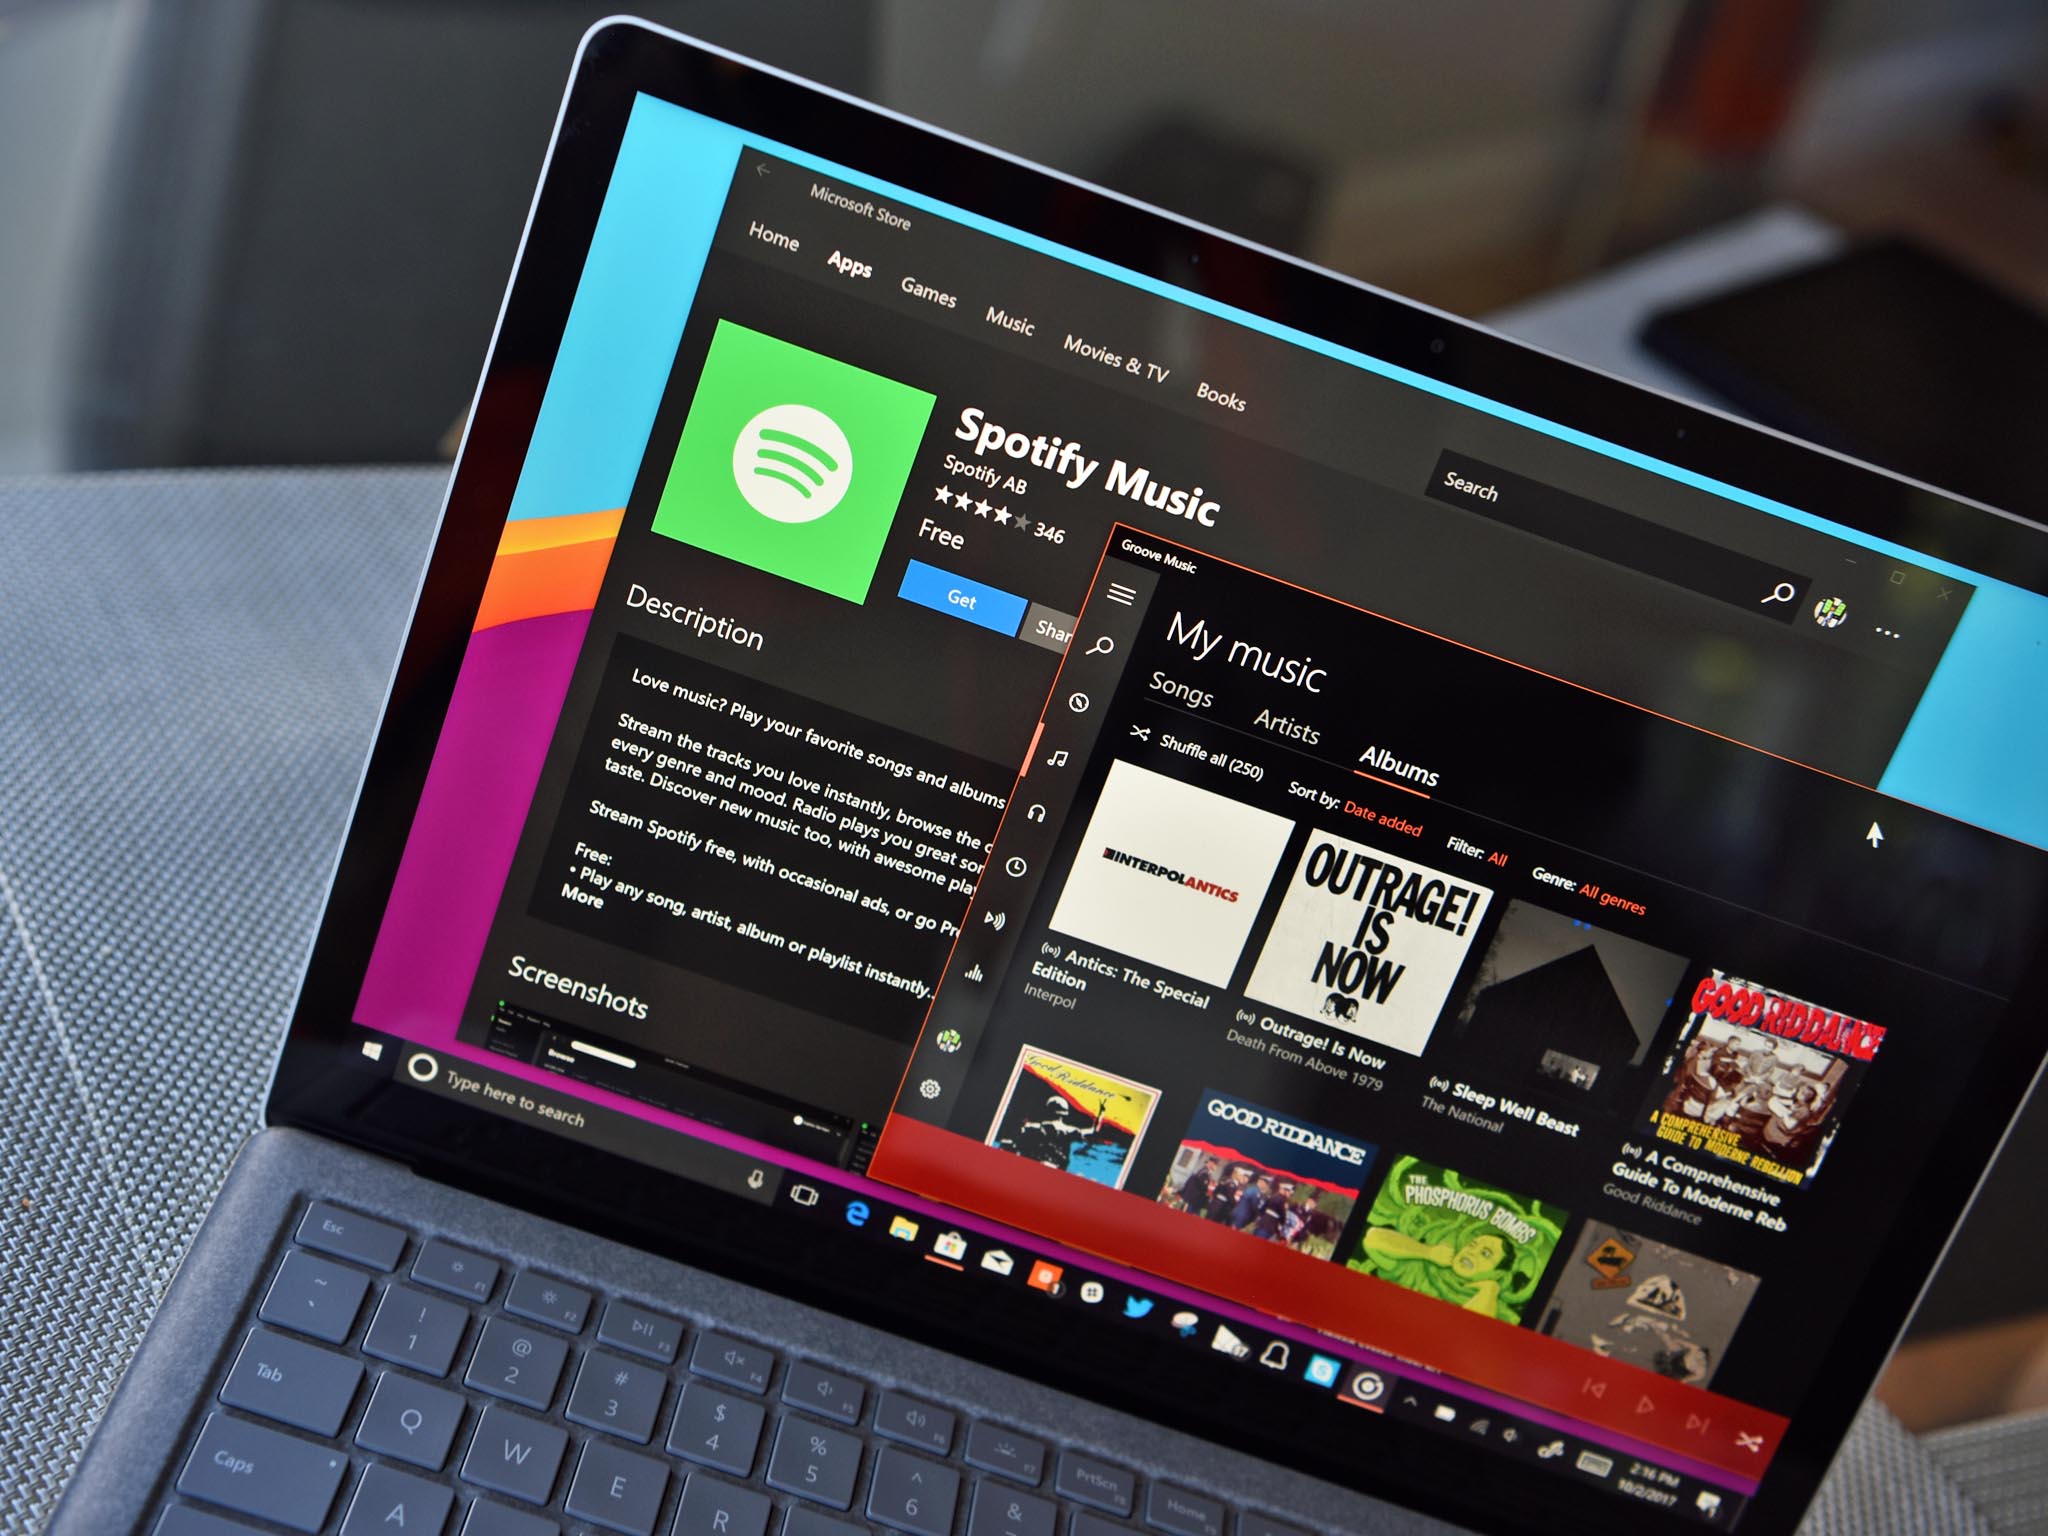 Cortana can now control Spotify playback on Windows 10